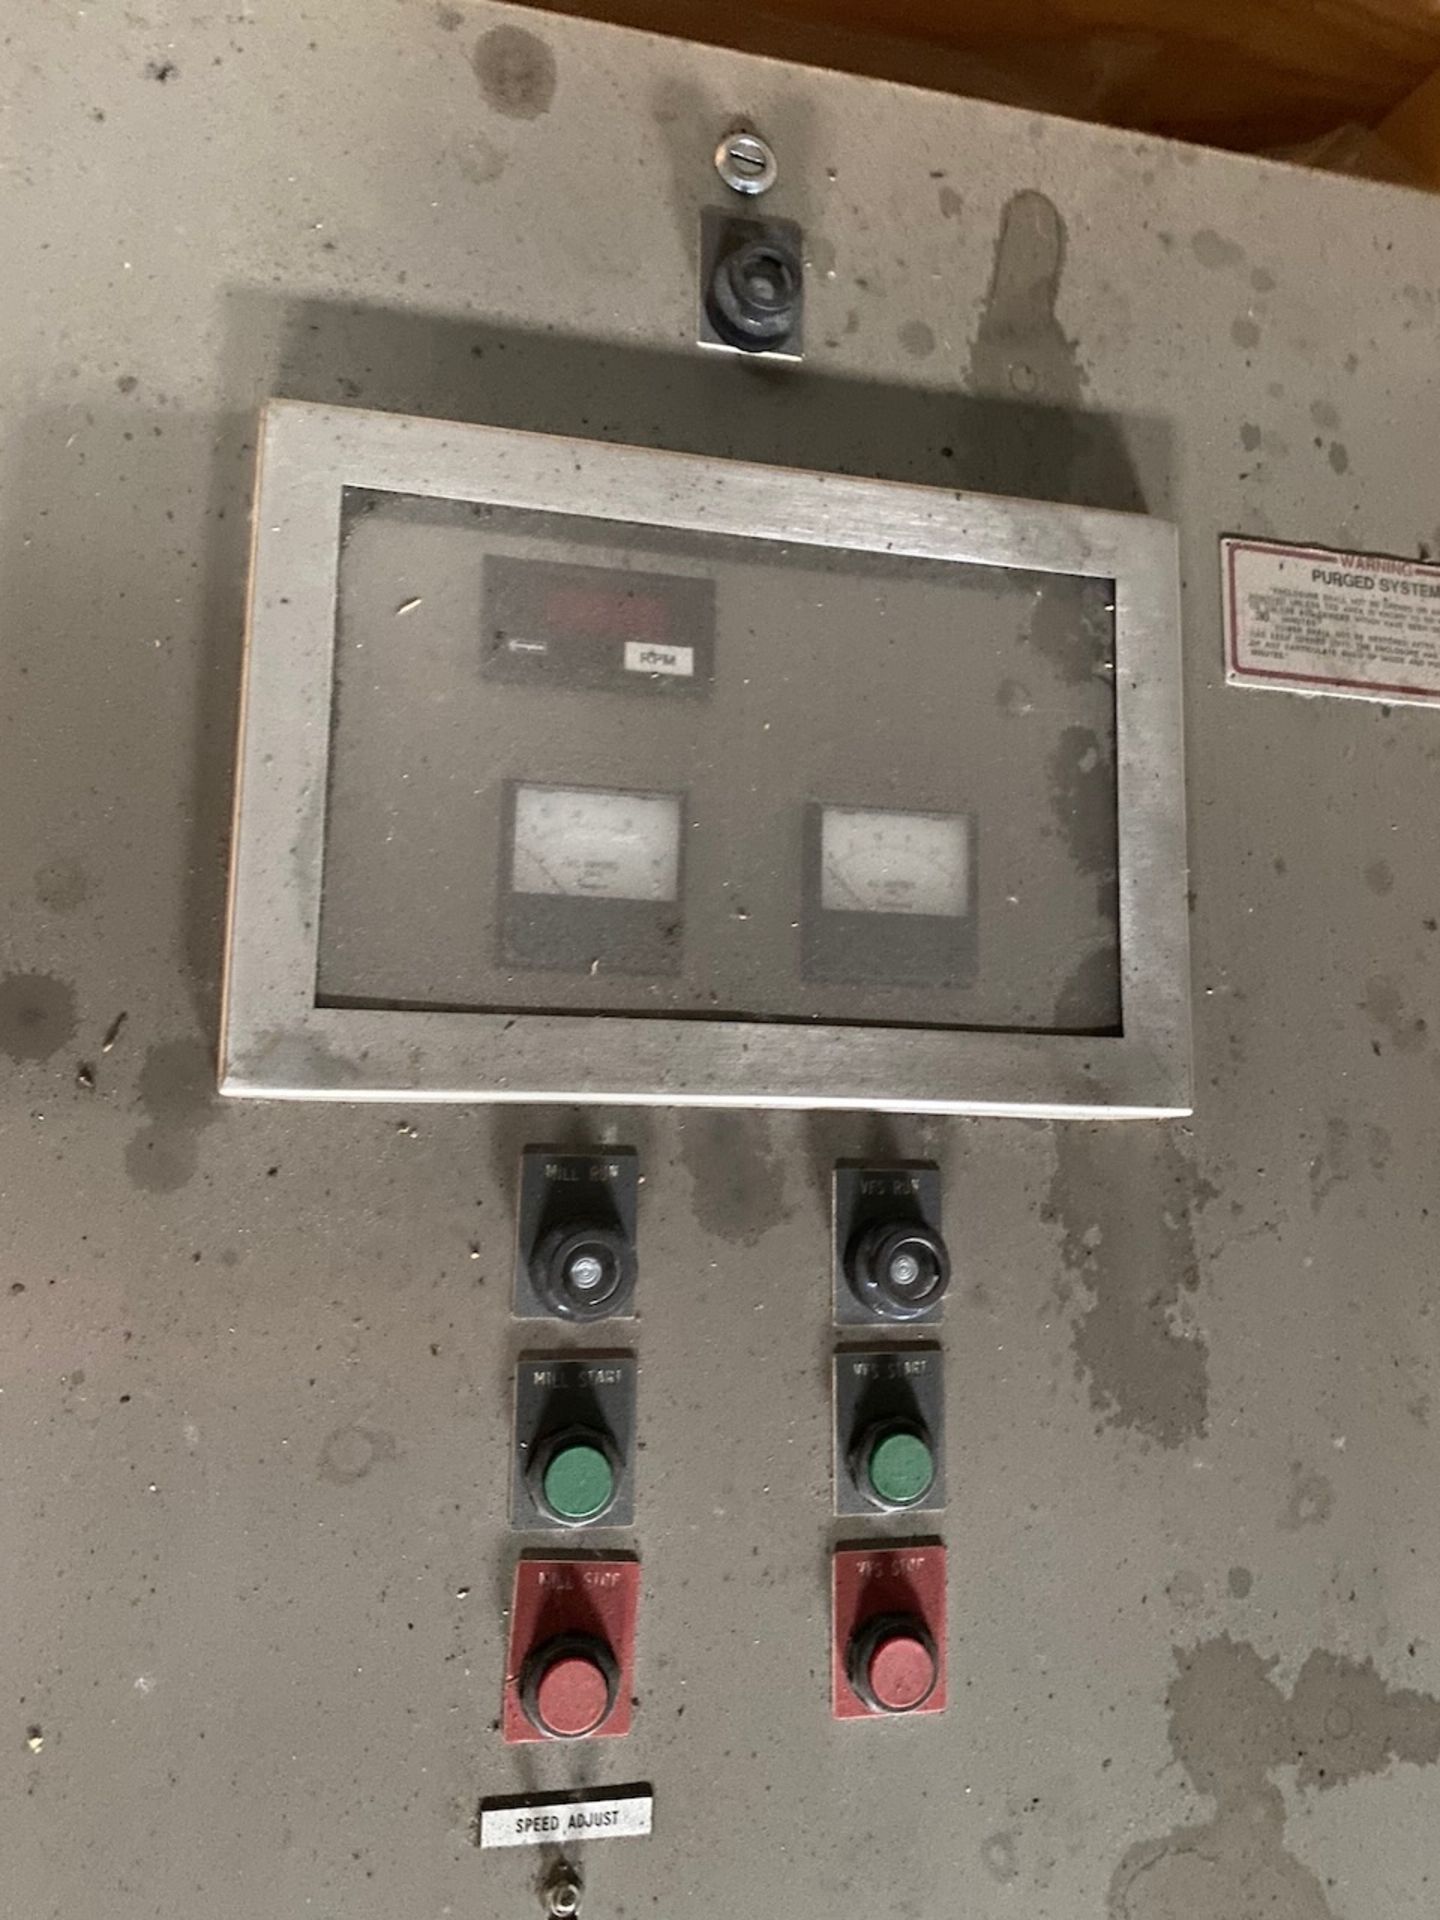 Stainless steel control box